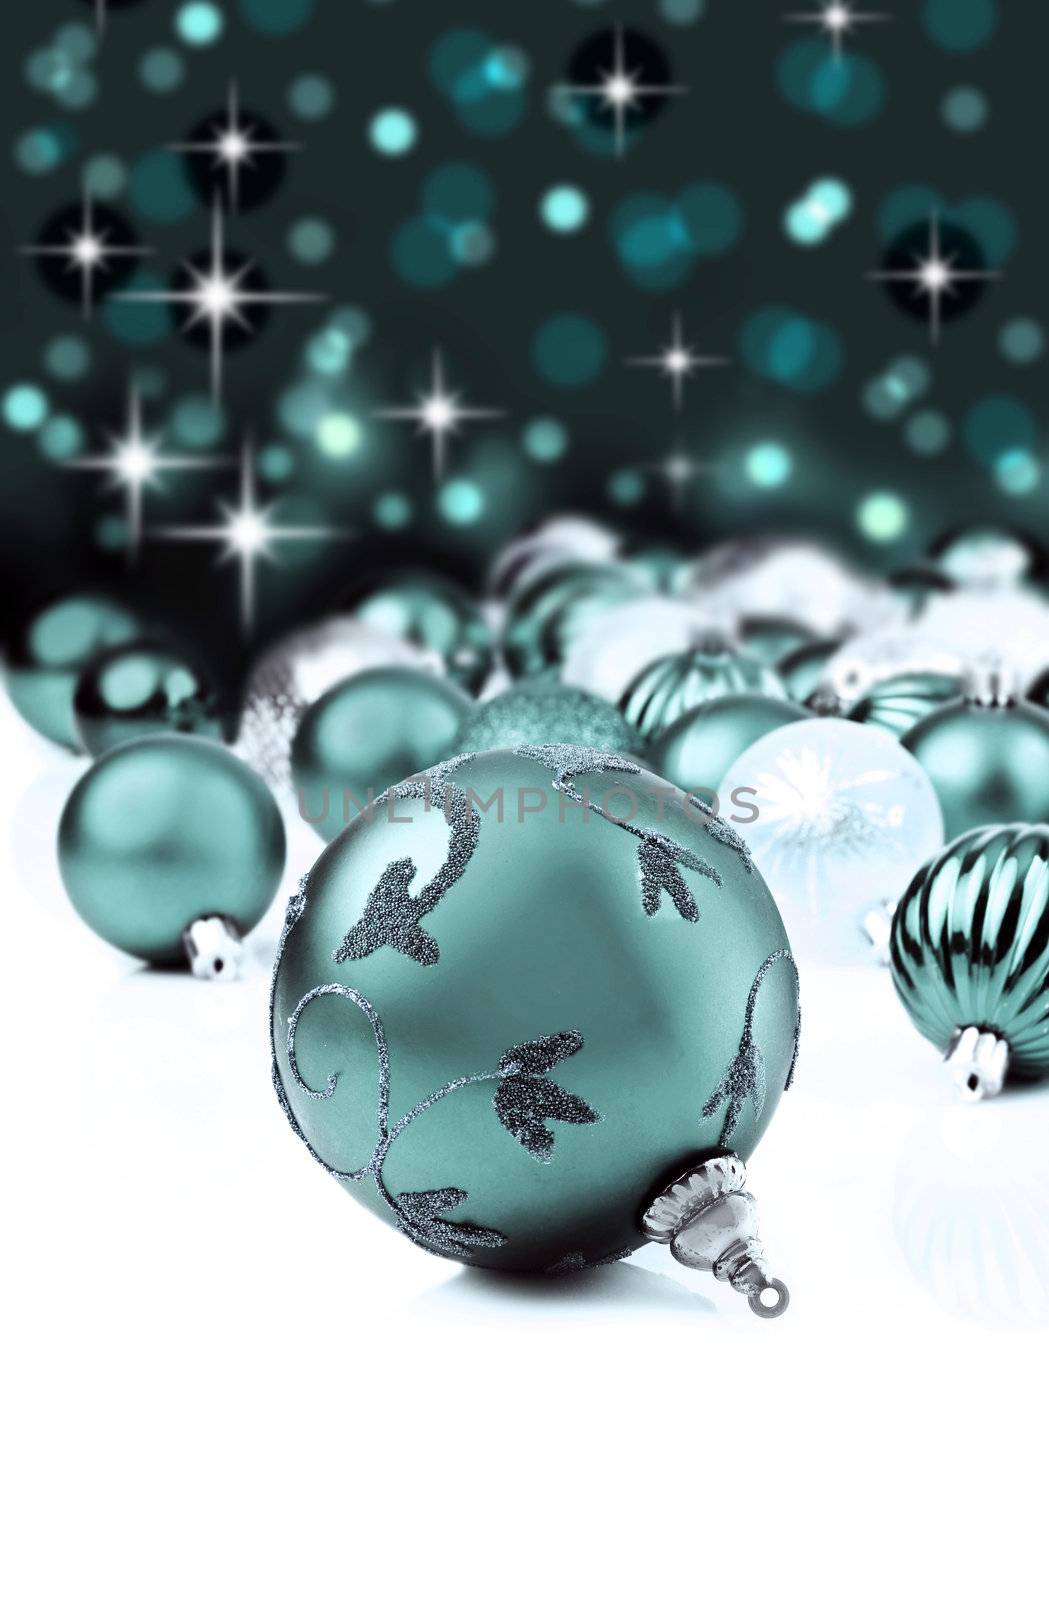 Blue decorative christmas ornaments with star background by tish1